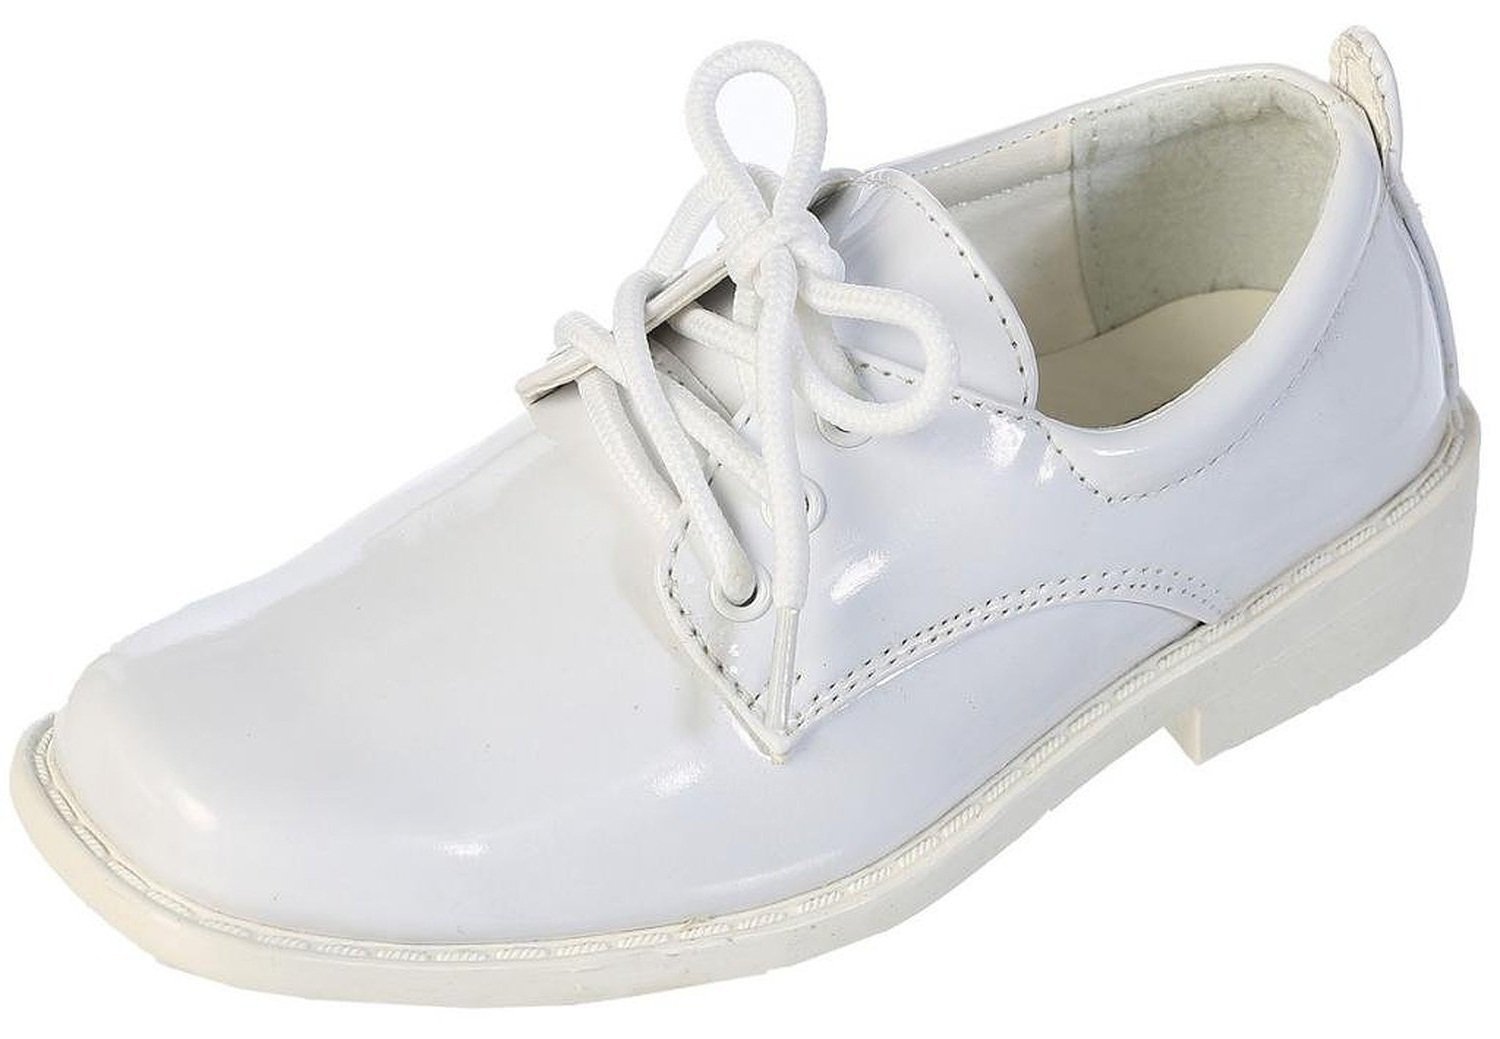 Boys Square Toe Lace Up Oxford Patent Dress Shoes - Available in White 8 Toddler